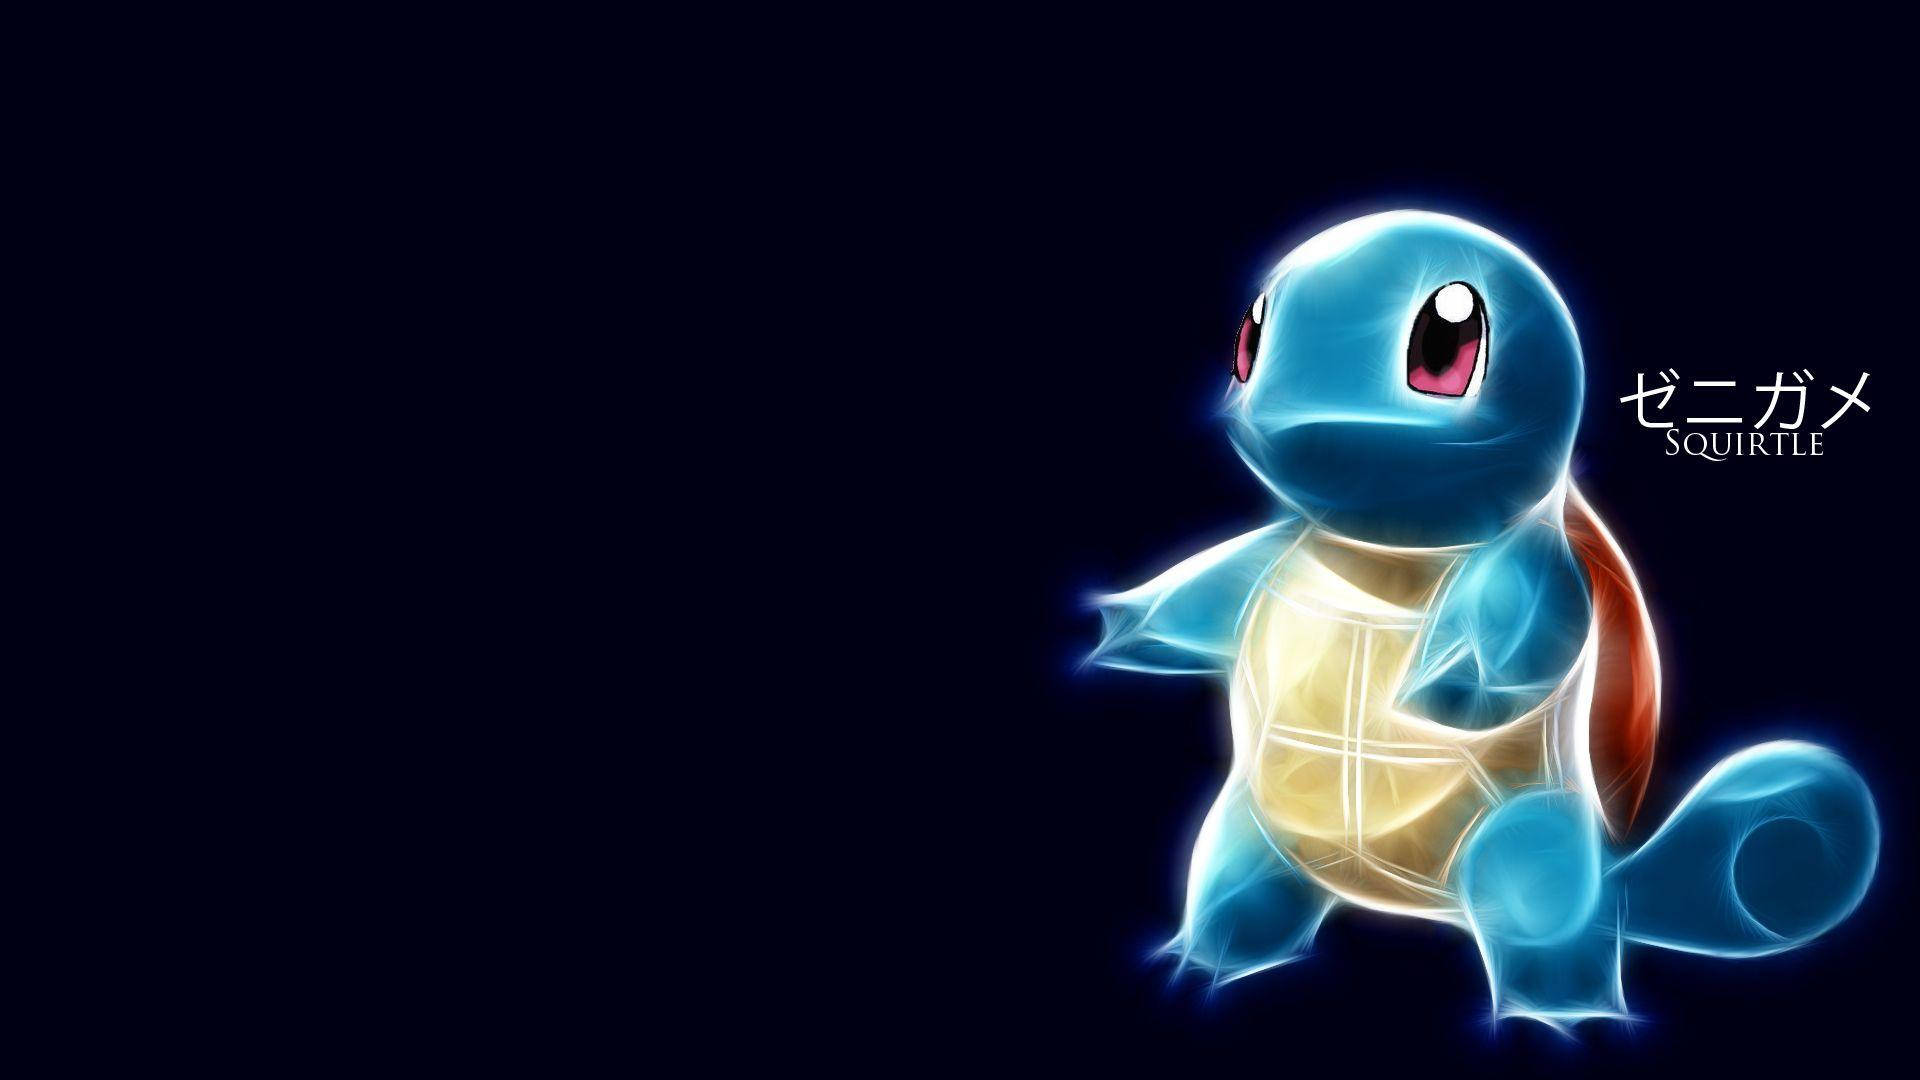 Illuminated By Neon Lights - Squirtle# Background